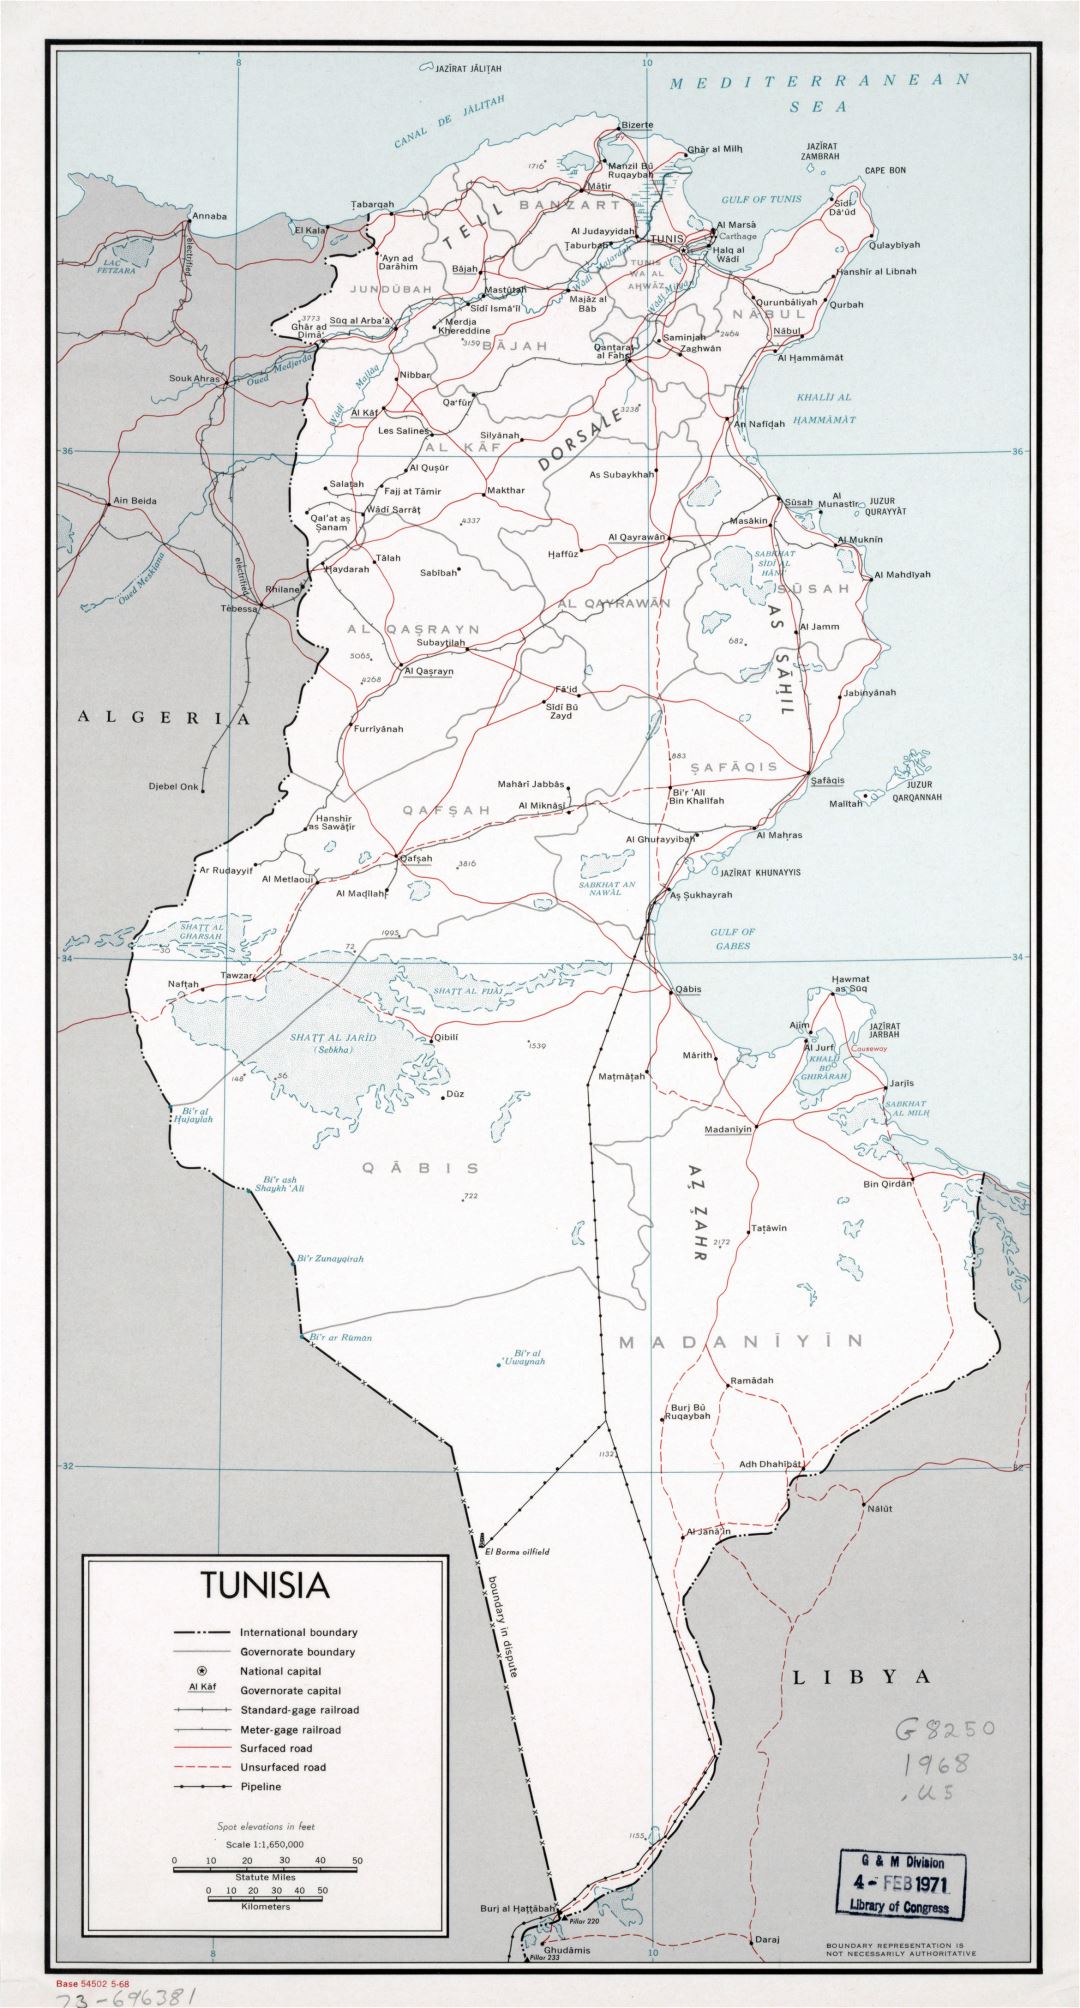 Large detailed political and administrative map of Tunisia with roads, railroads, pipelines and major cities - 1968